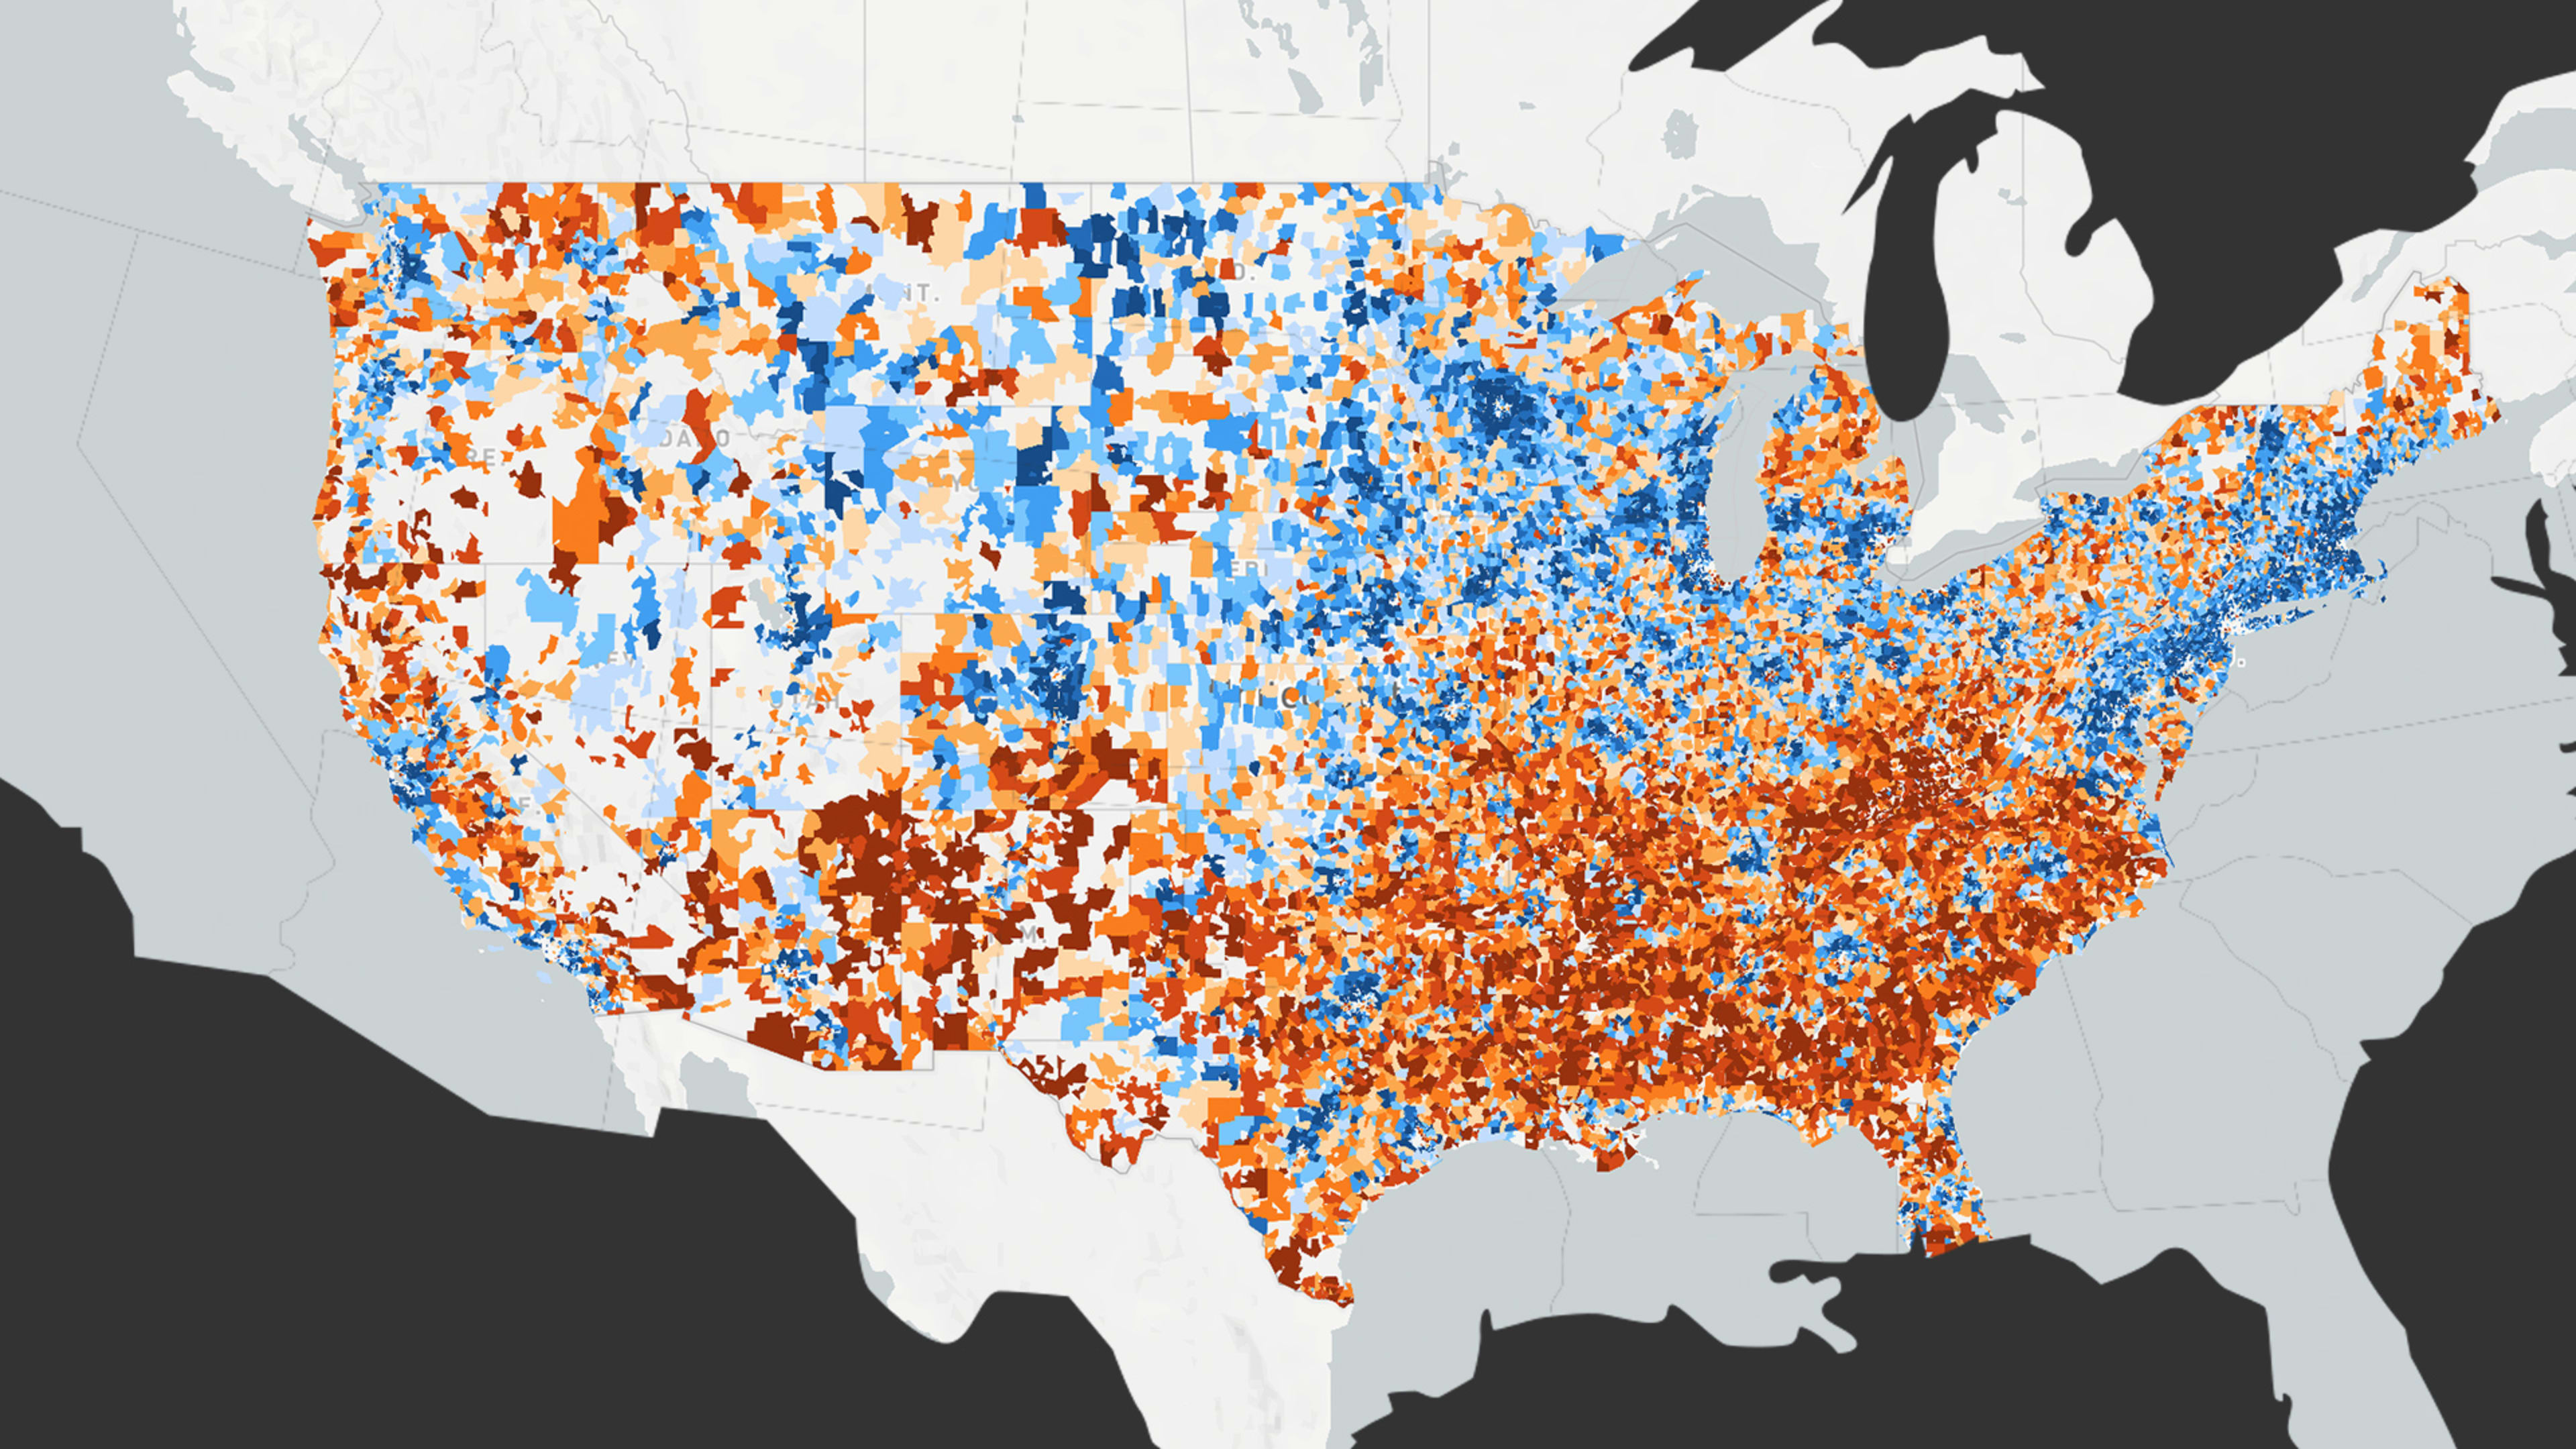 Huge Swaths Of America’s Communities Are Economically Stagnant: How Can We Make Them Grow?